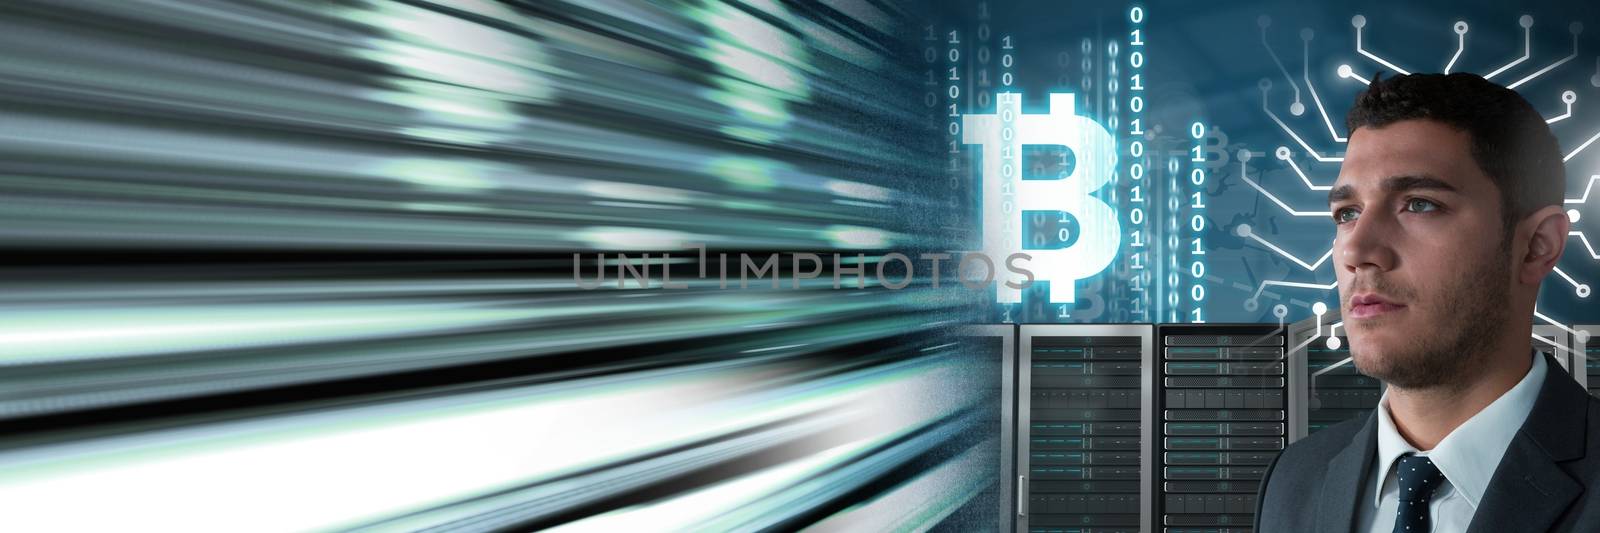 Digital composite of Man with computer servers and bitcoin technology information interface transition